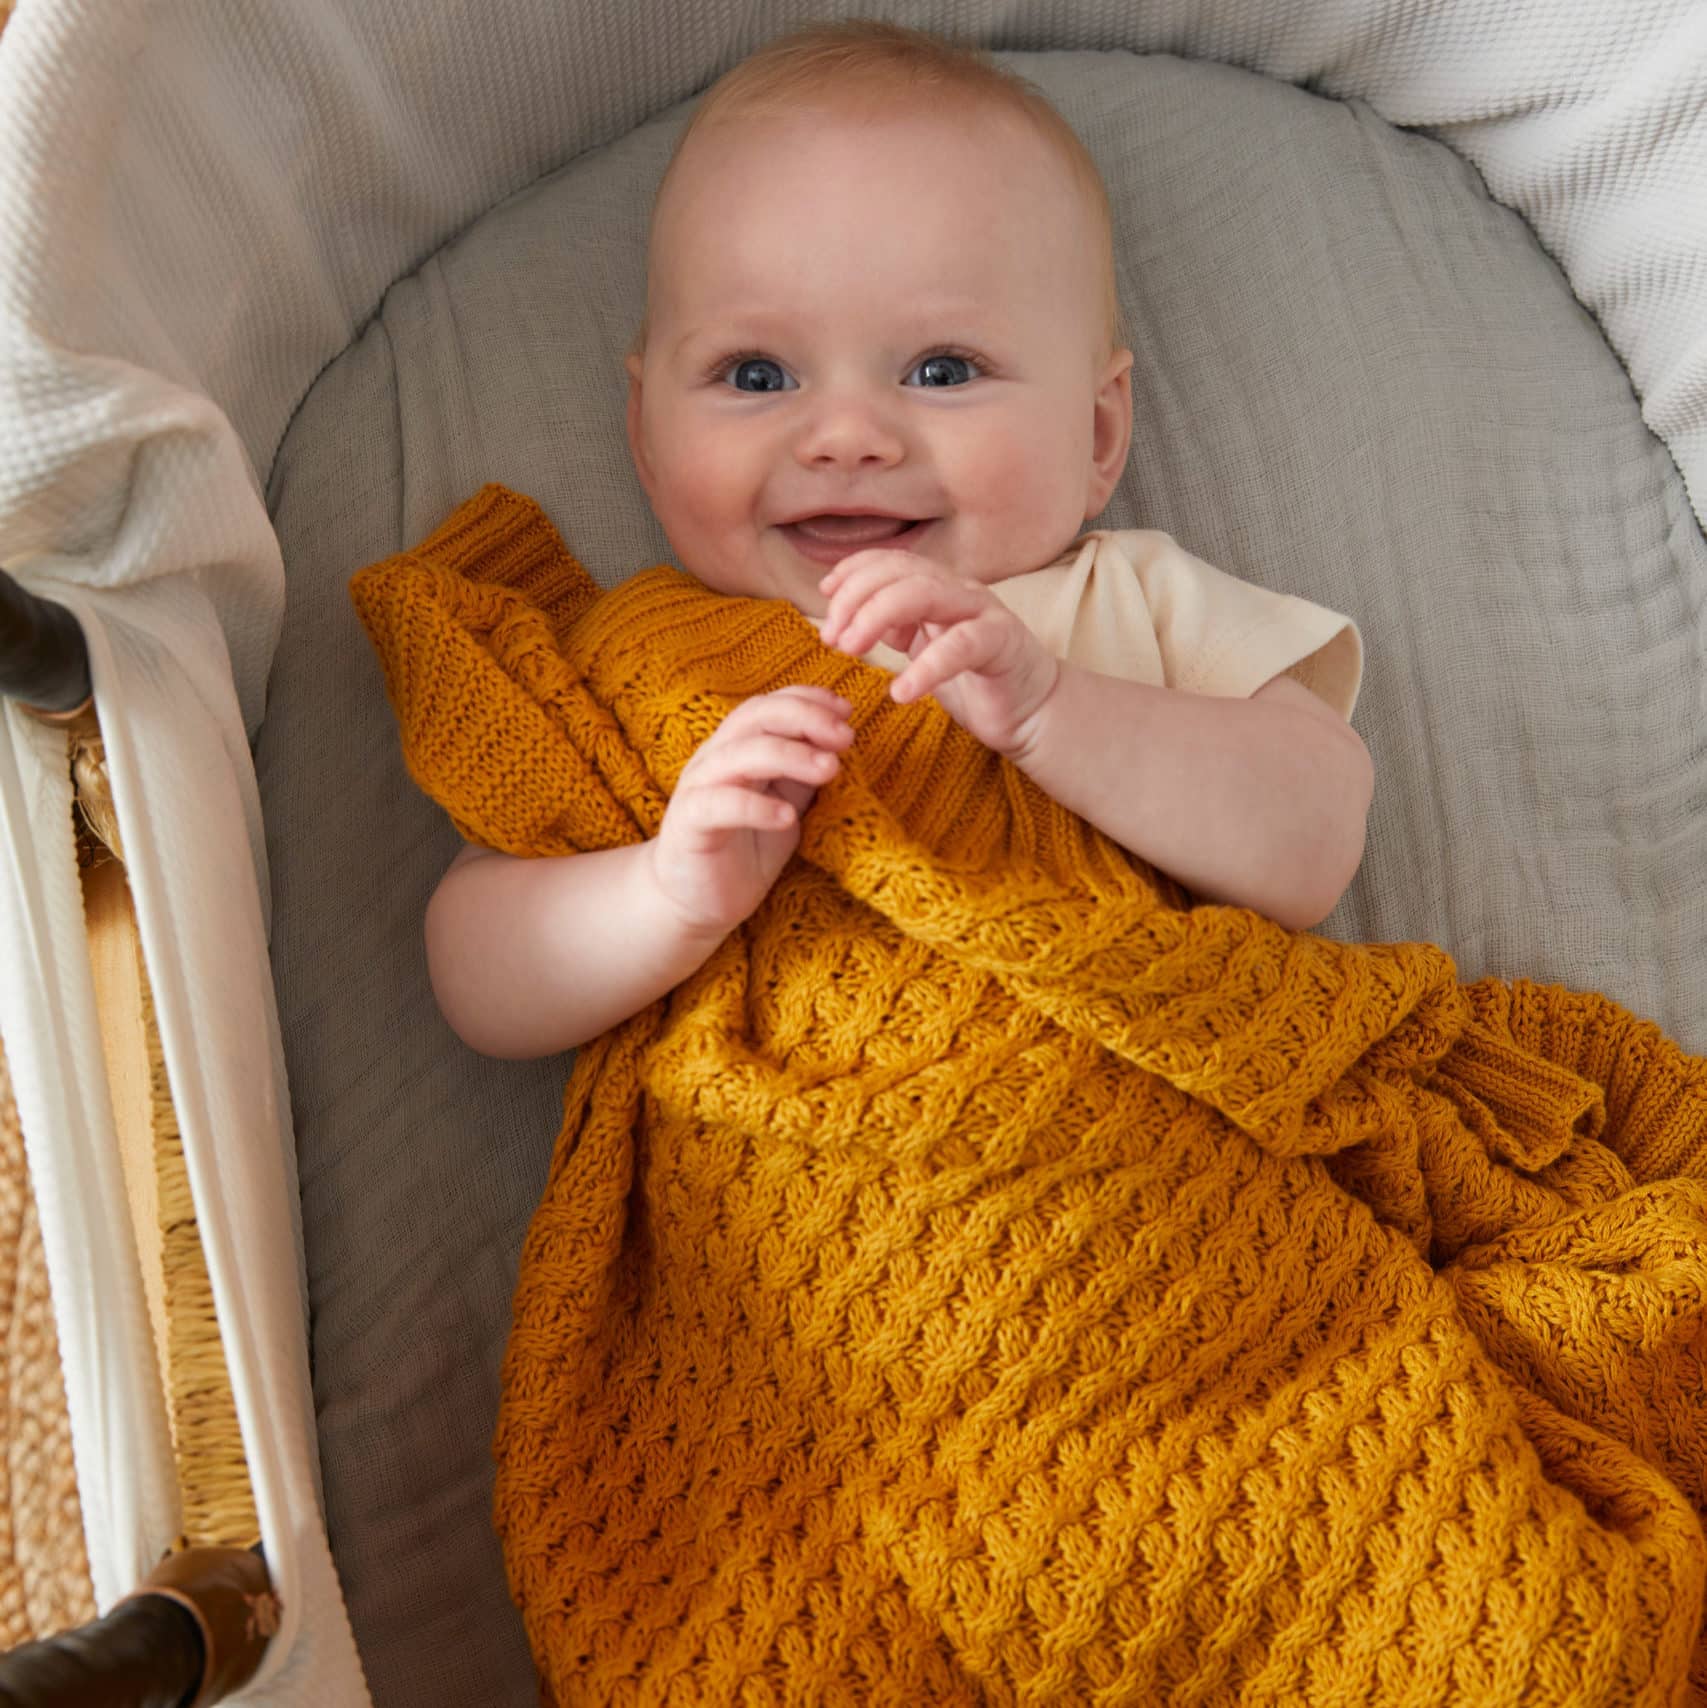 Pilbeam Basket weave knitted blanket Newborn baby gift Melbourne at Sticky Fingers Children's Boutique